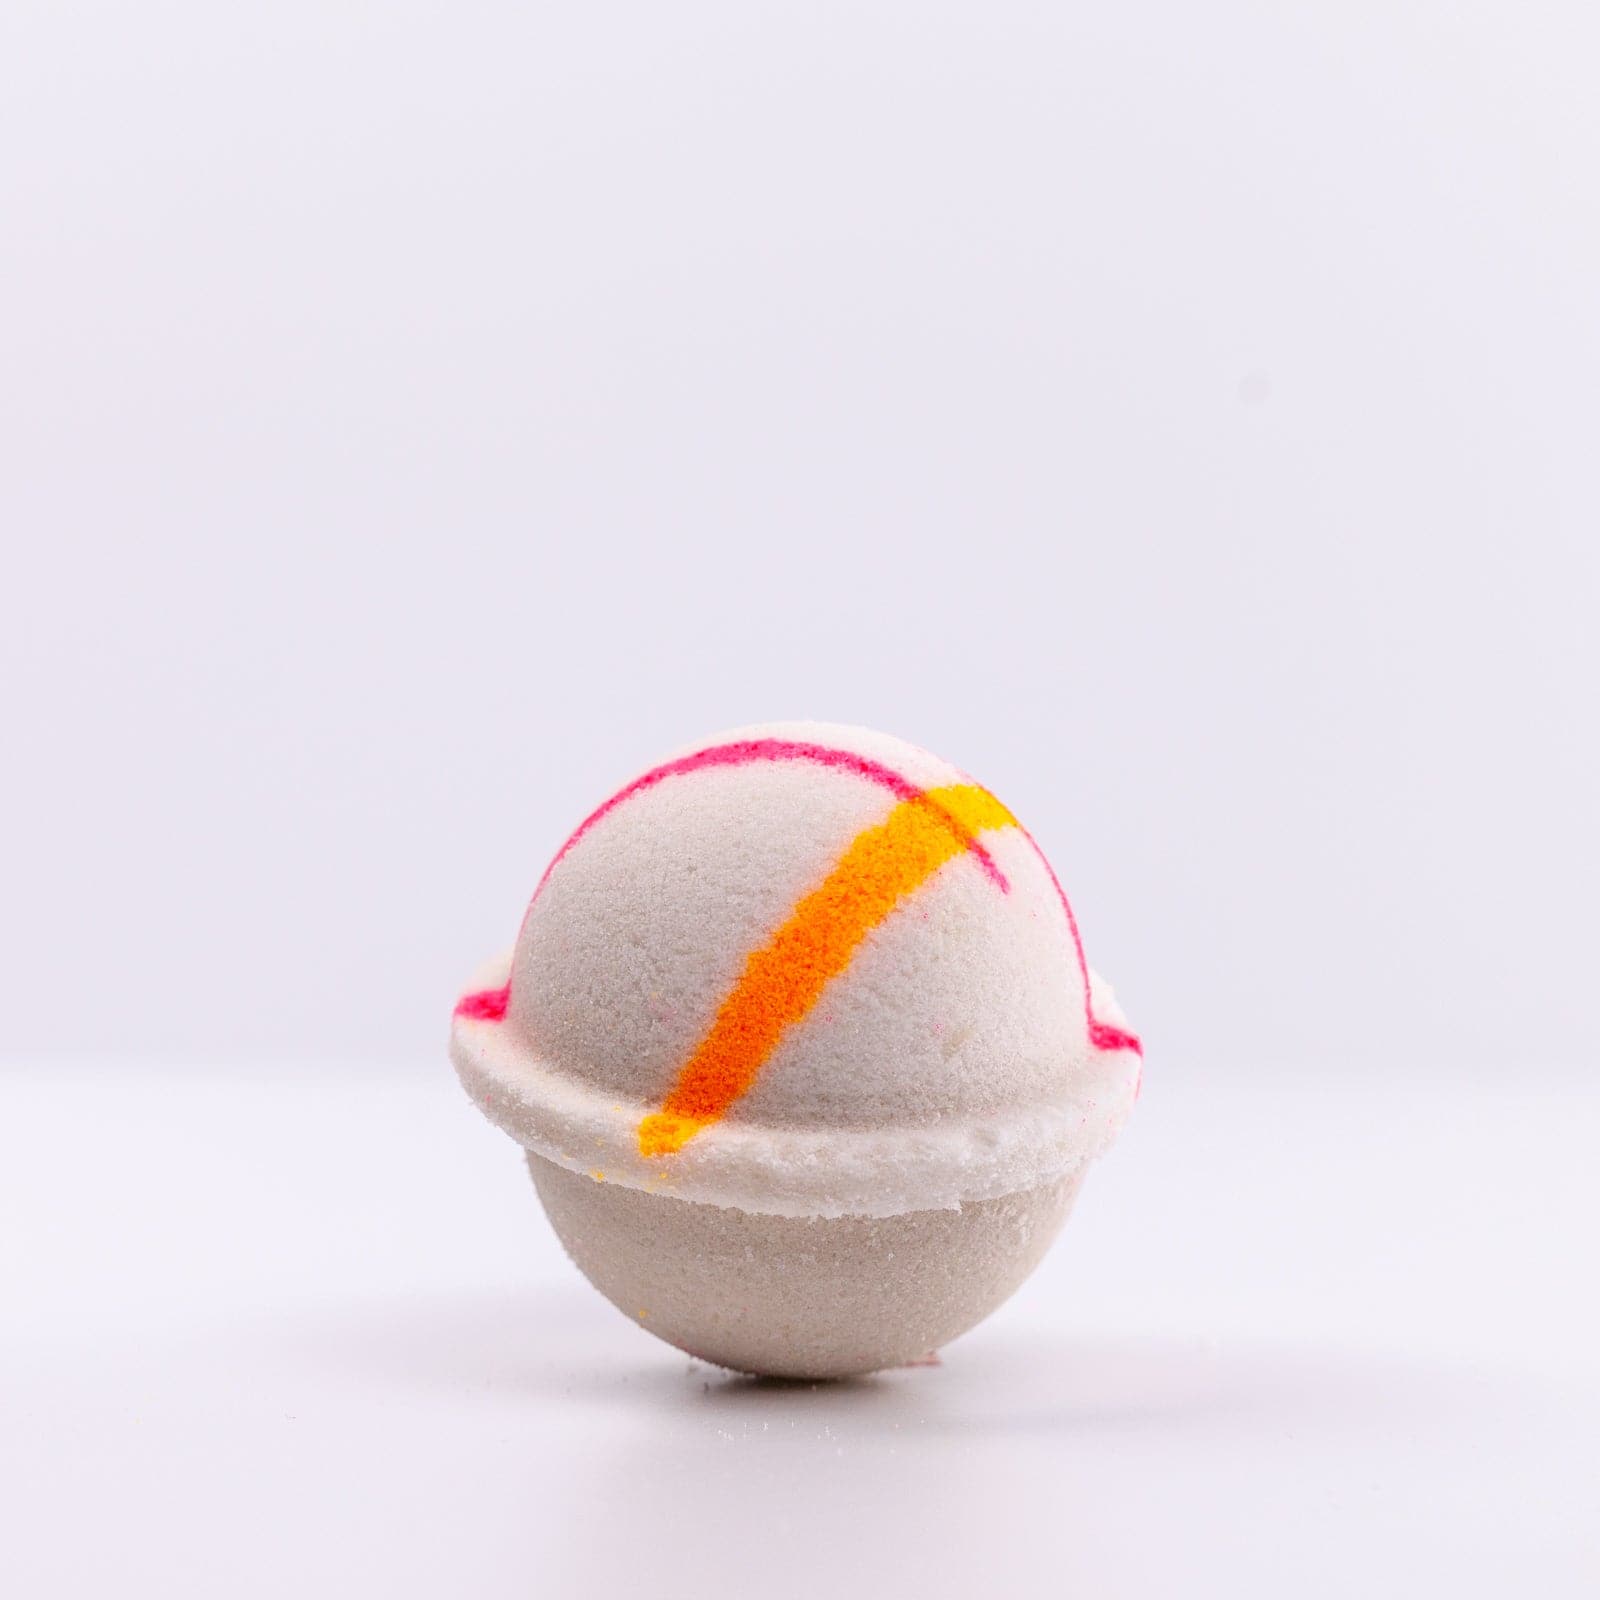 Island Nectar Bath Bomb with orange and pink design against white background